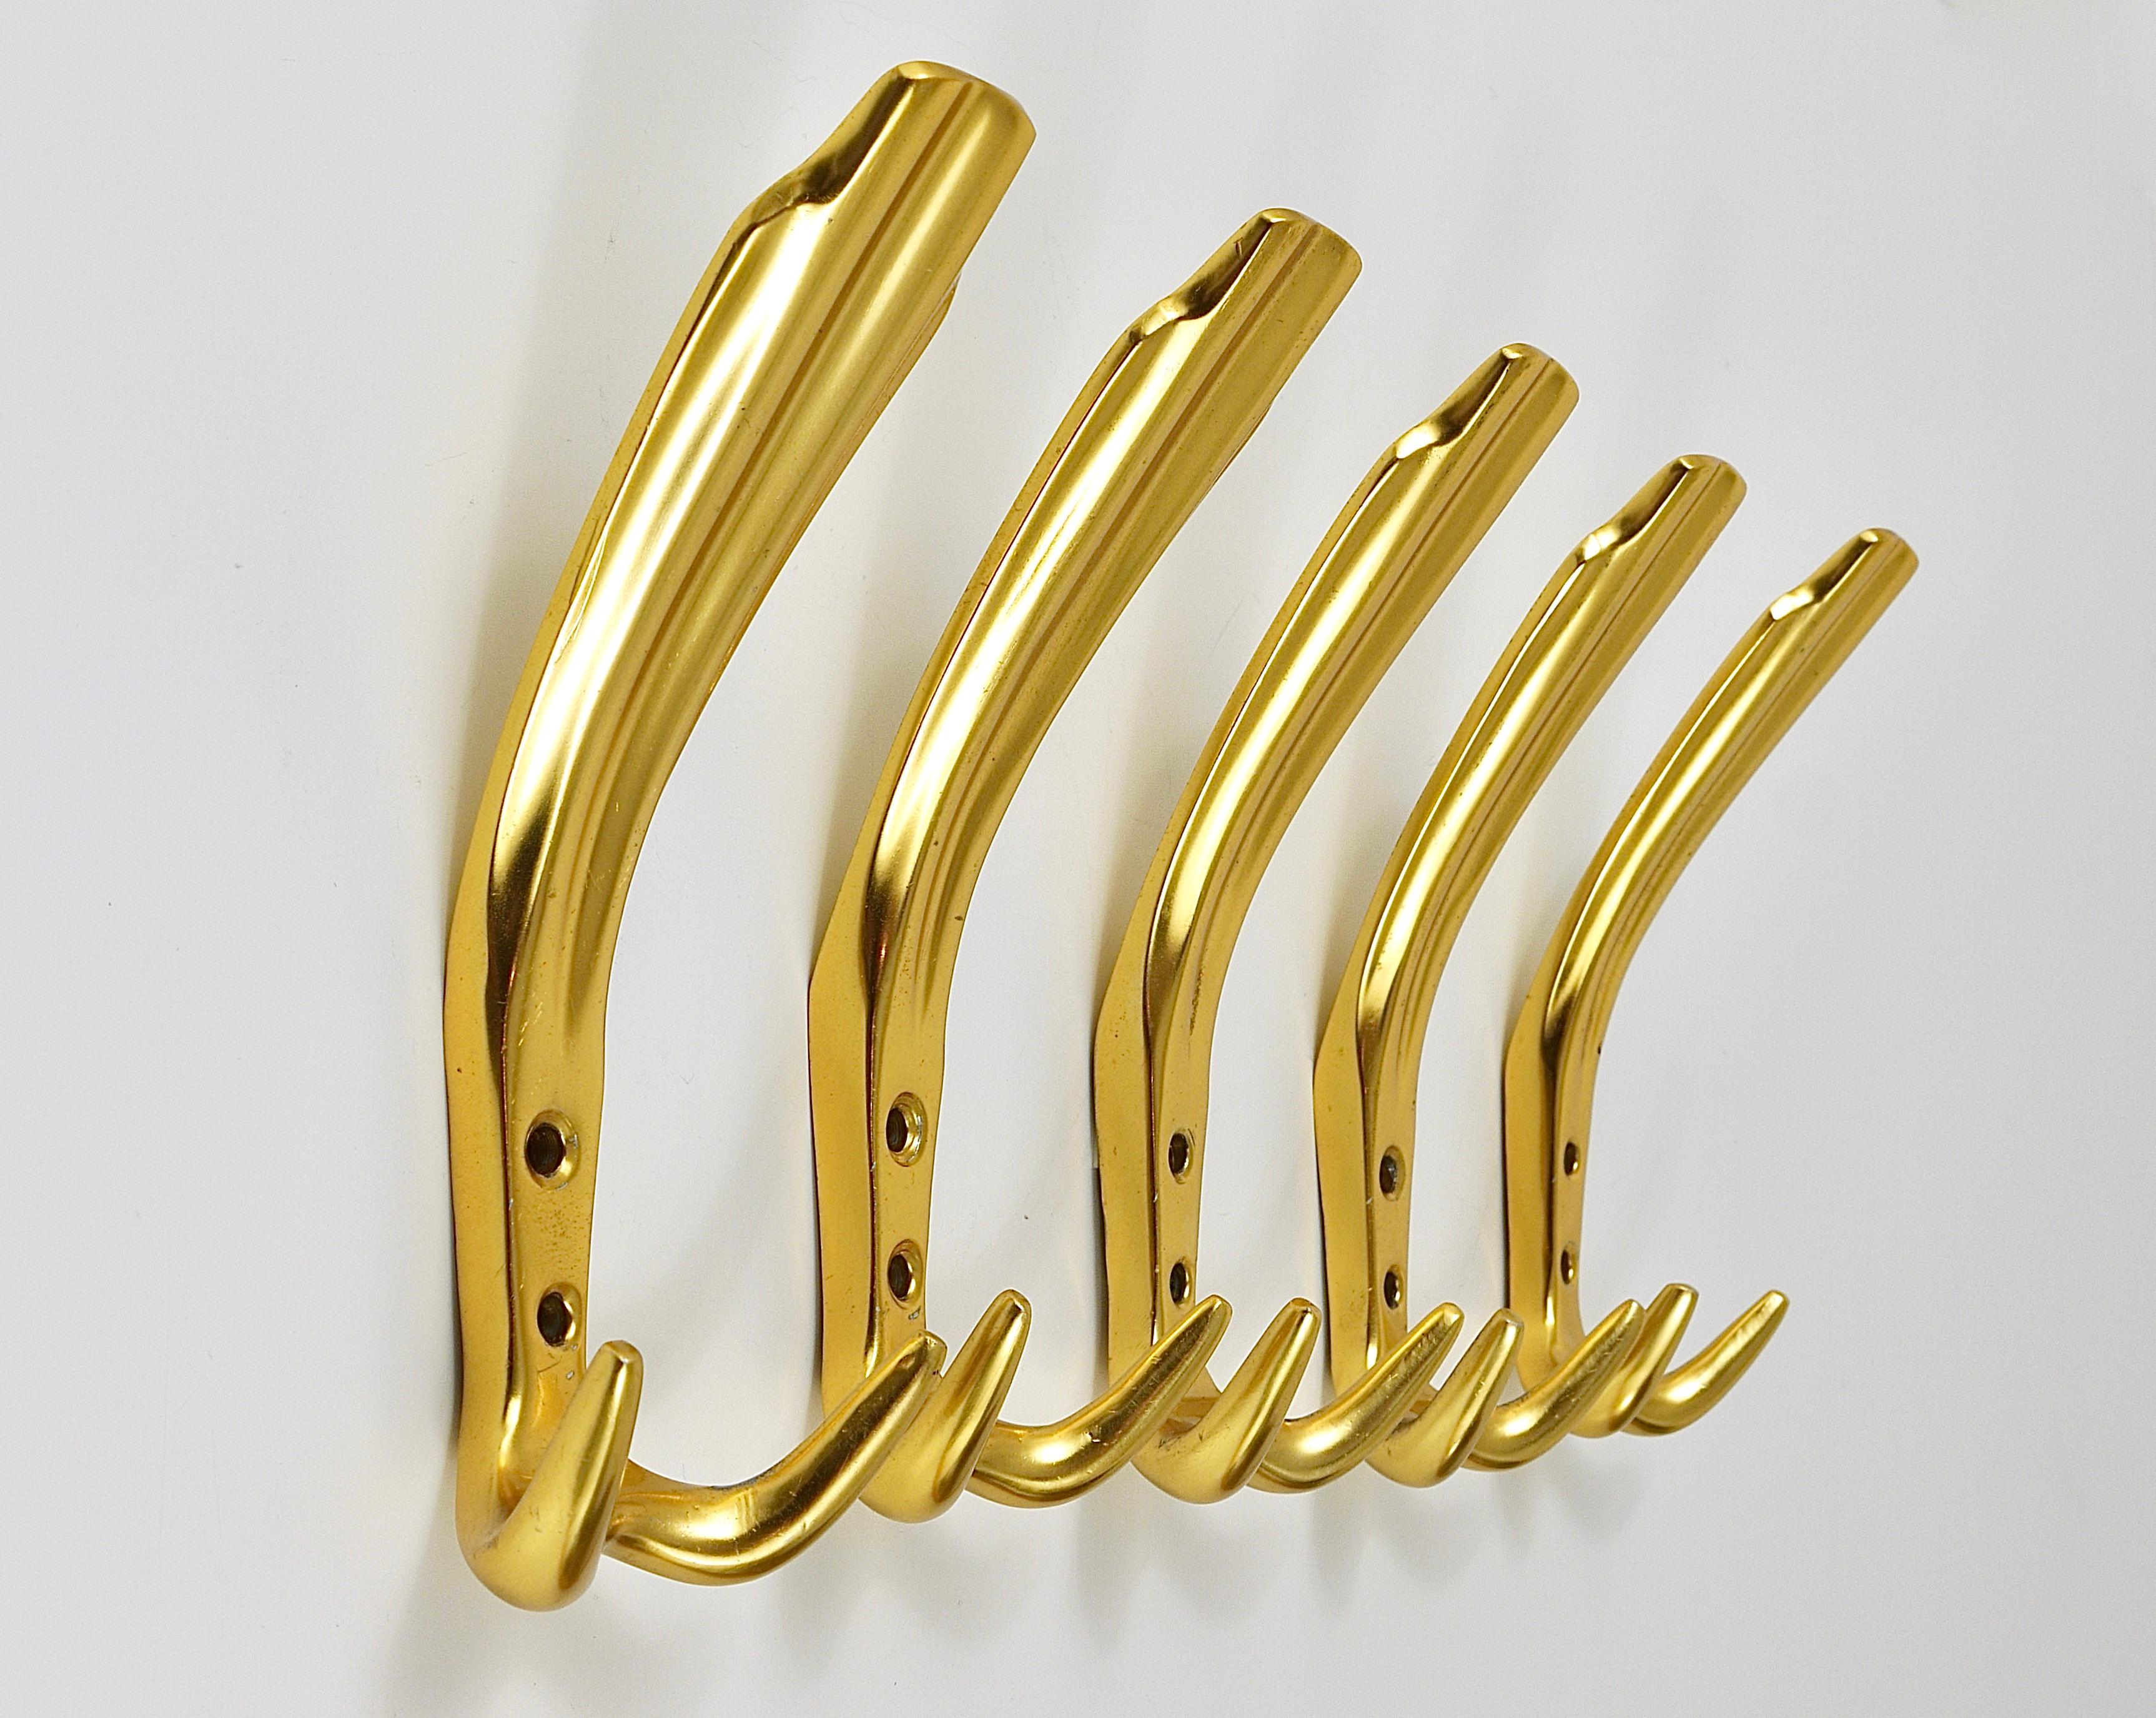 Up to Five Golden Hollywood Regency Wall Coat Hooks, Italy, 1970s For Sale 3